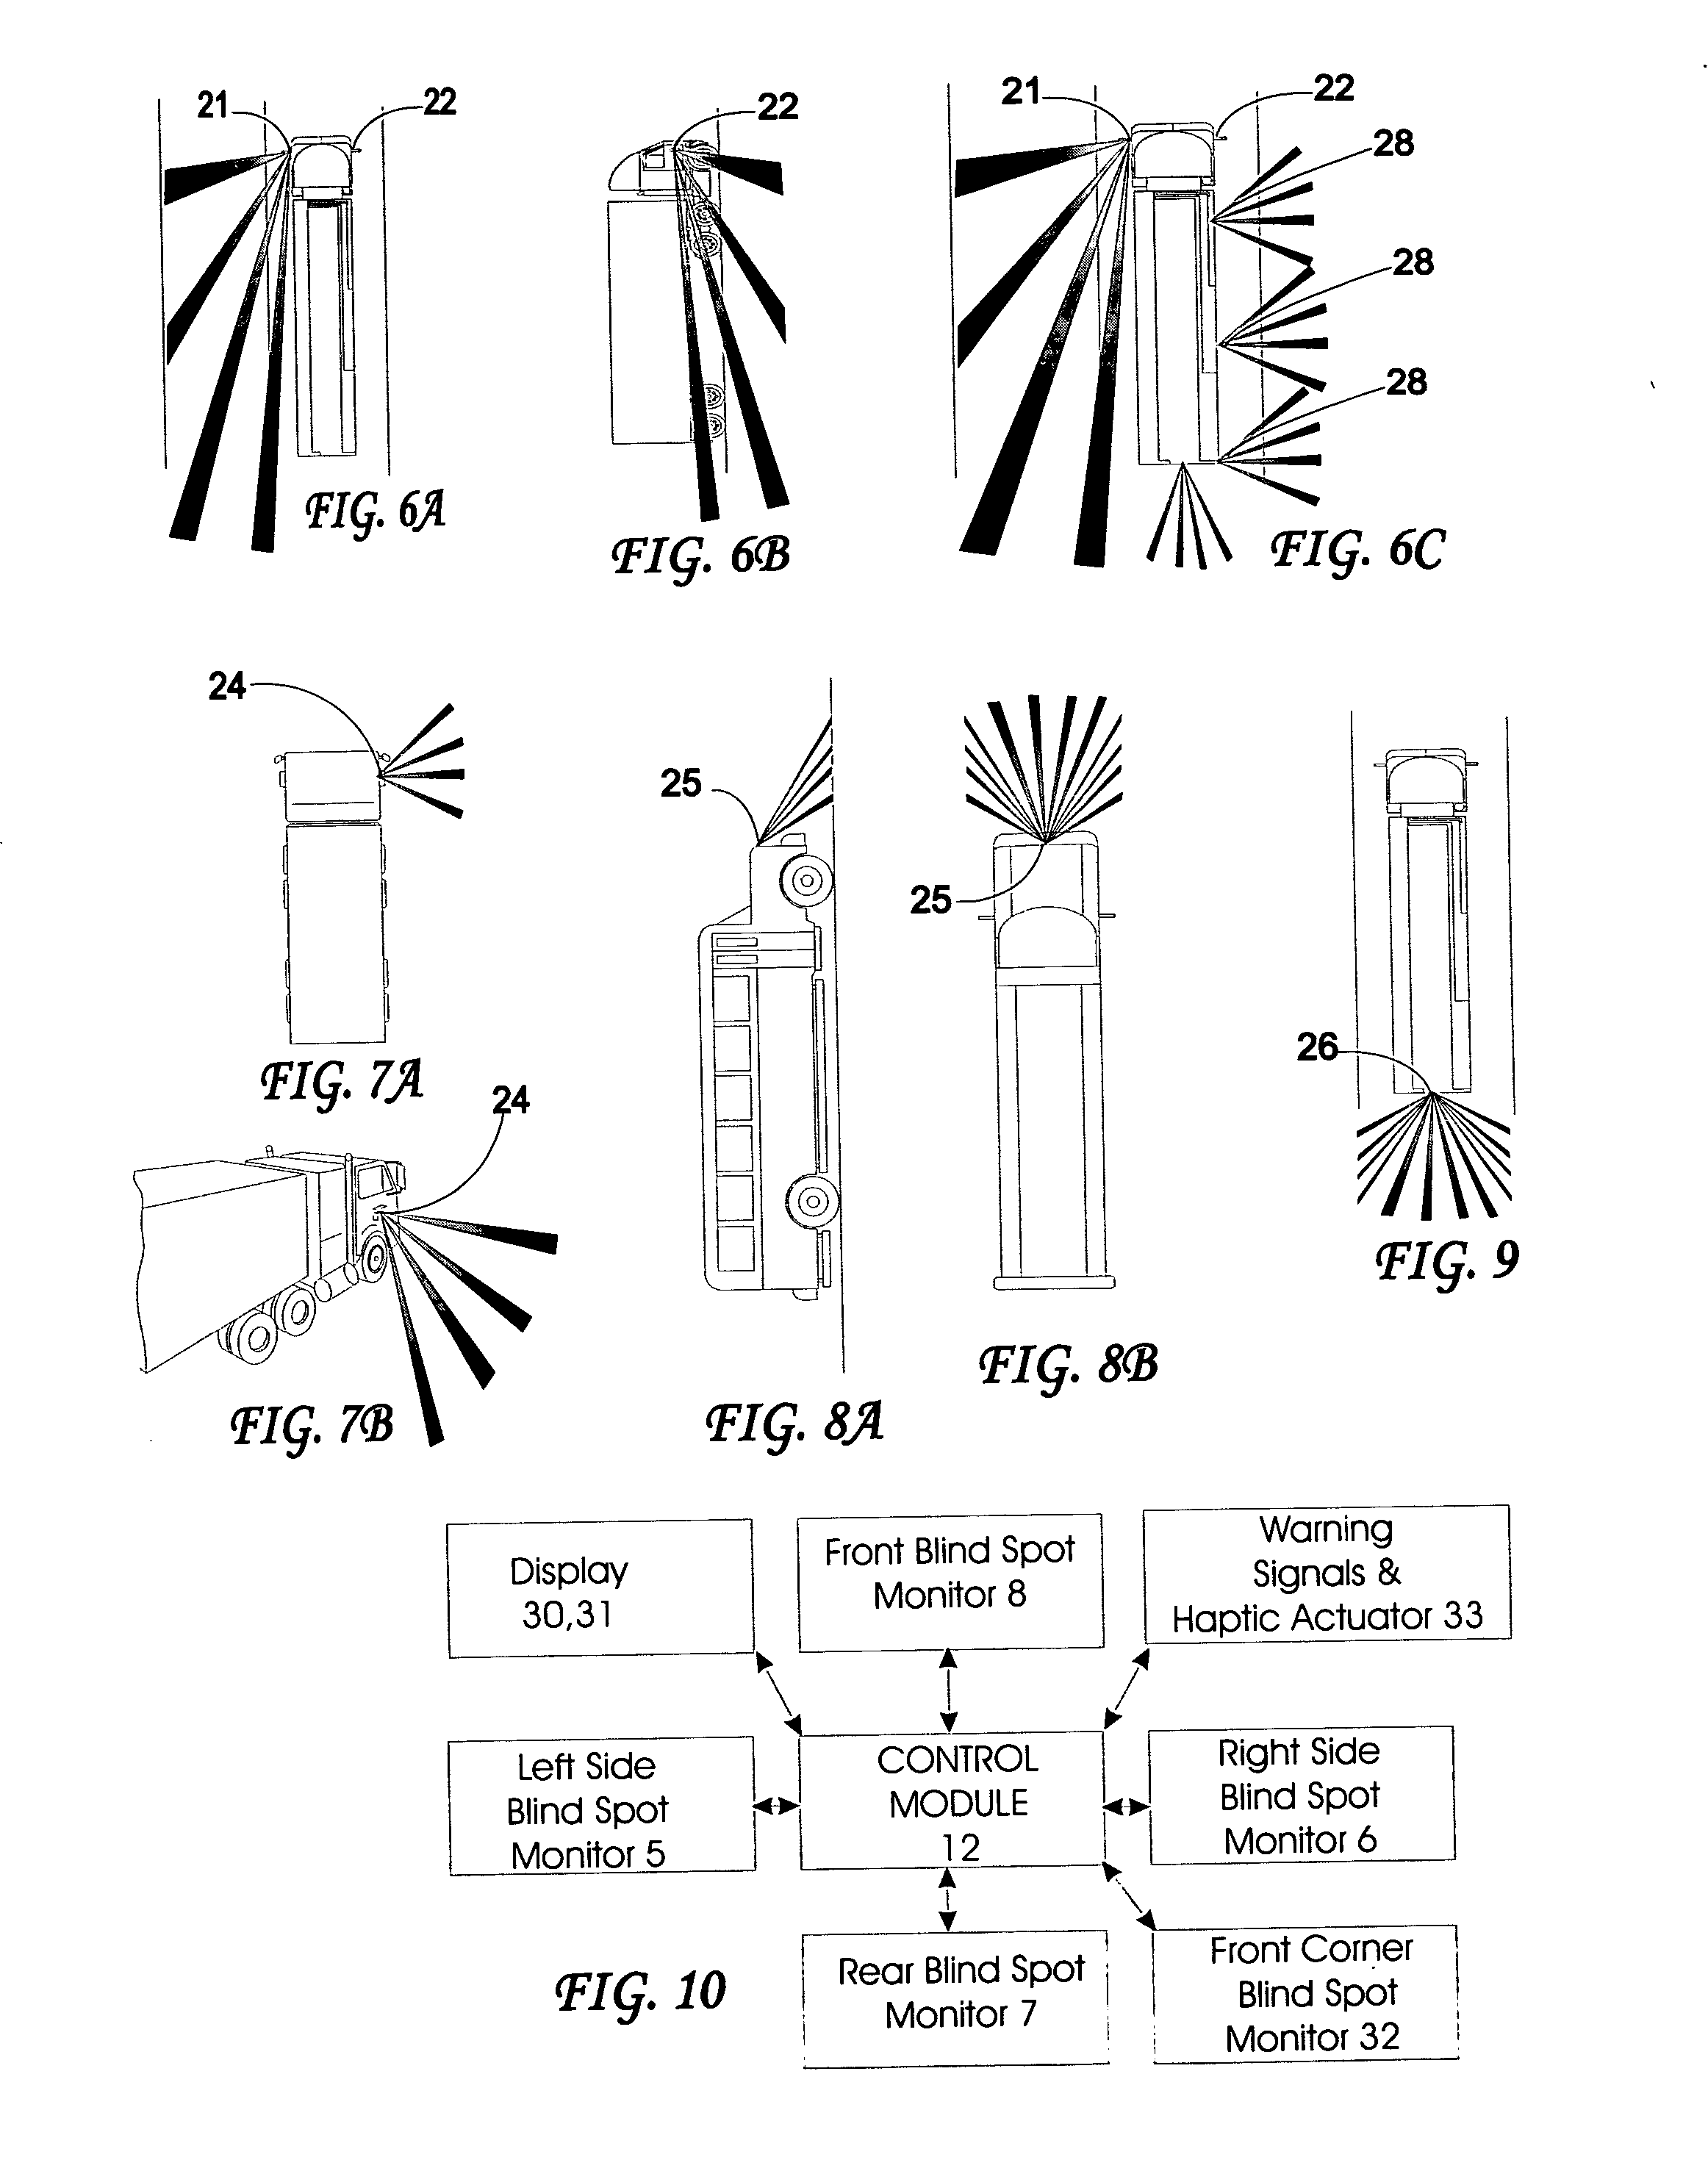 Method for obtaining information about objects in a vehicular blind spot